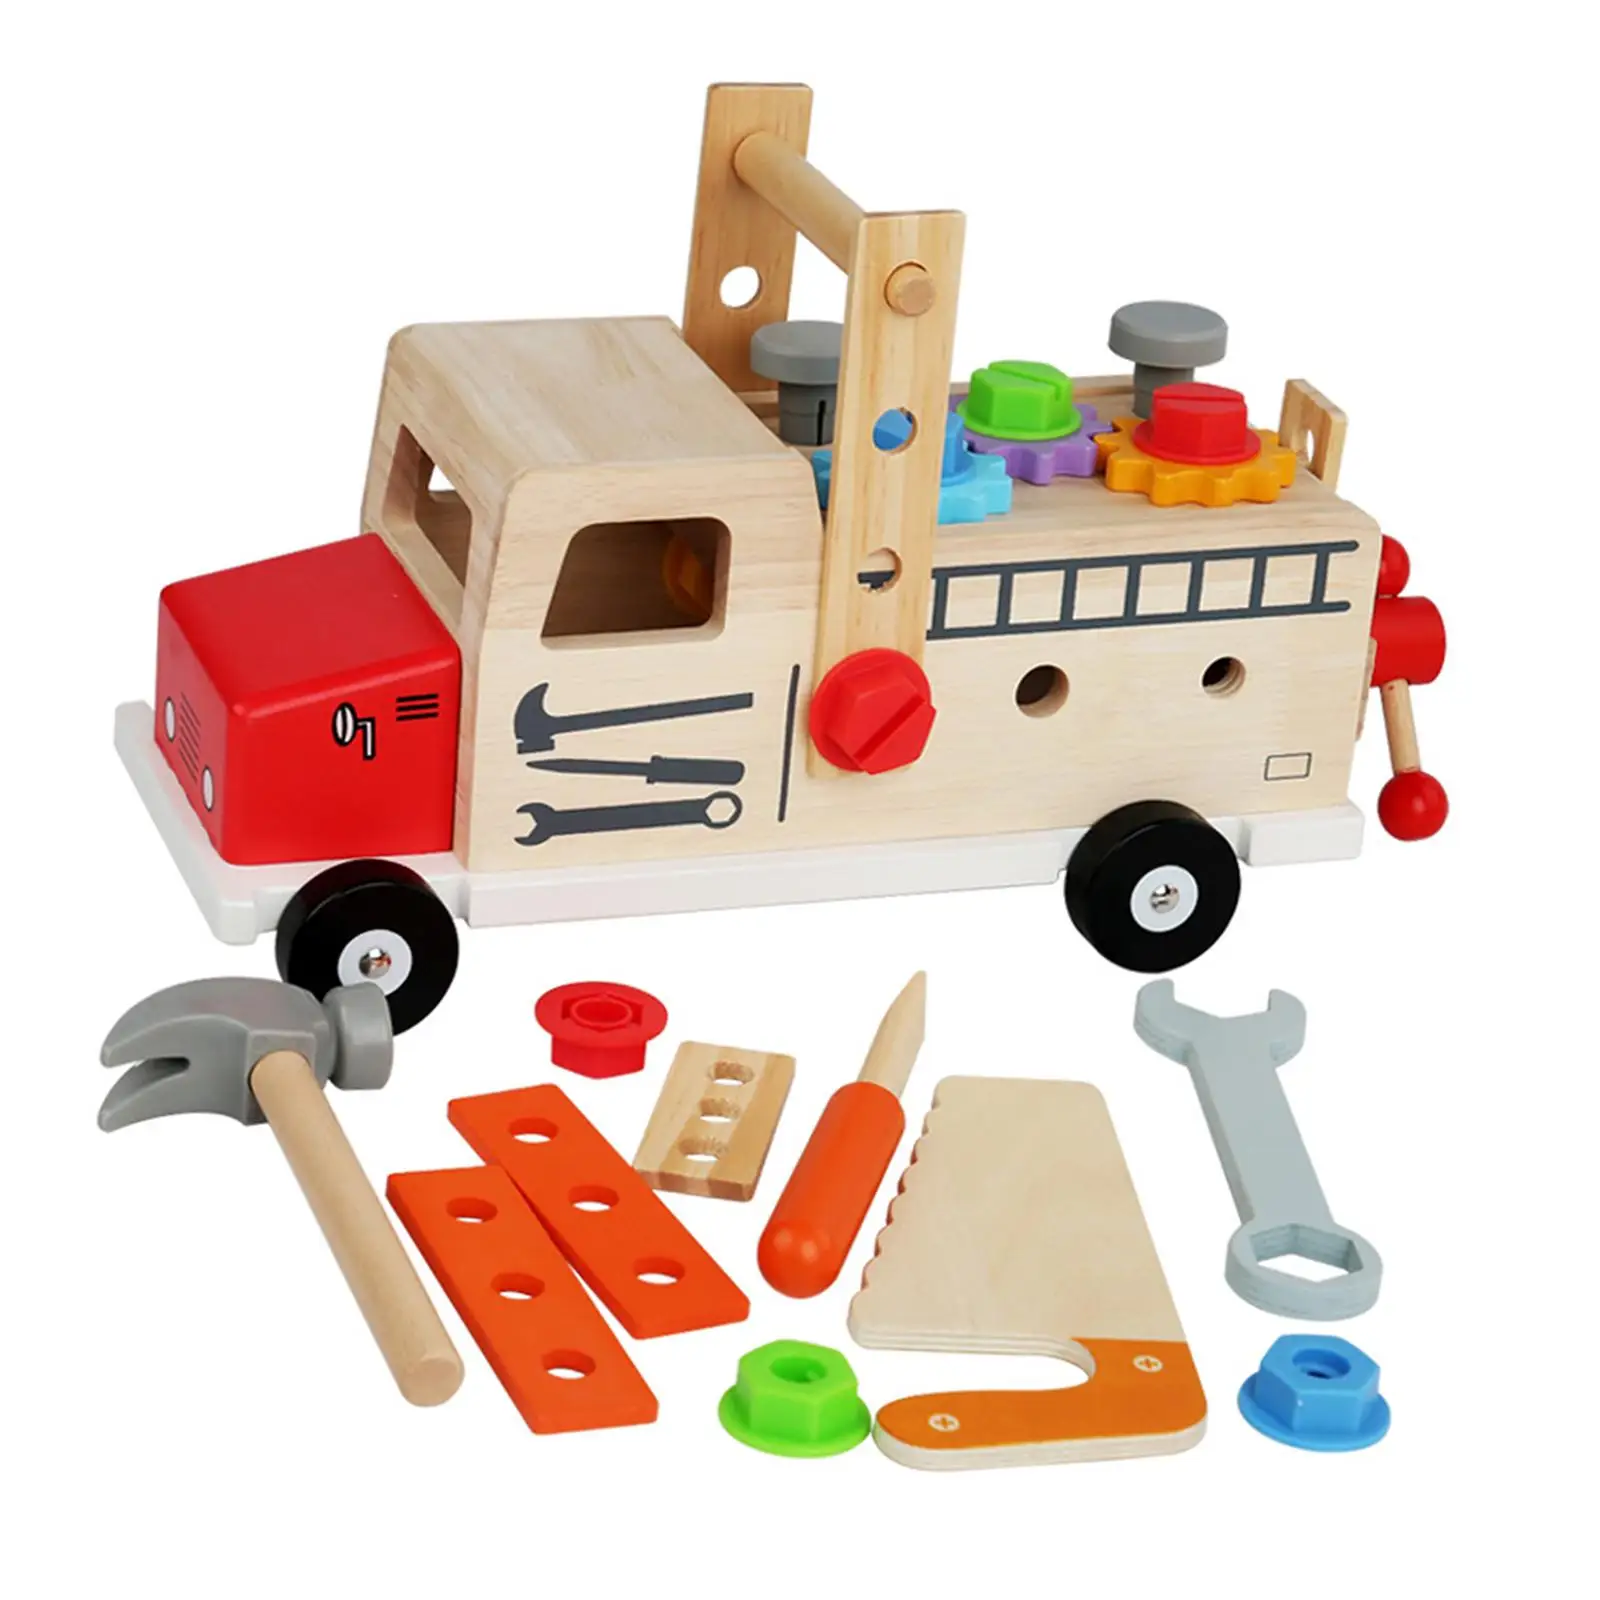 Kids Tool Screwing Assembly Carpenter Toy Construction Toy for Kids Children